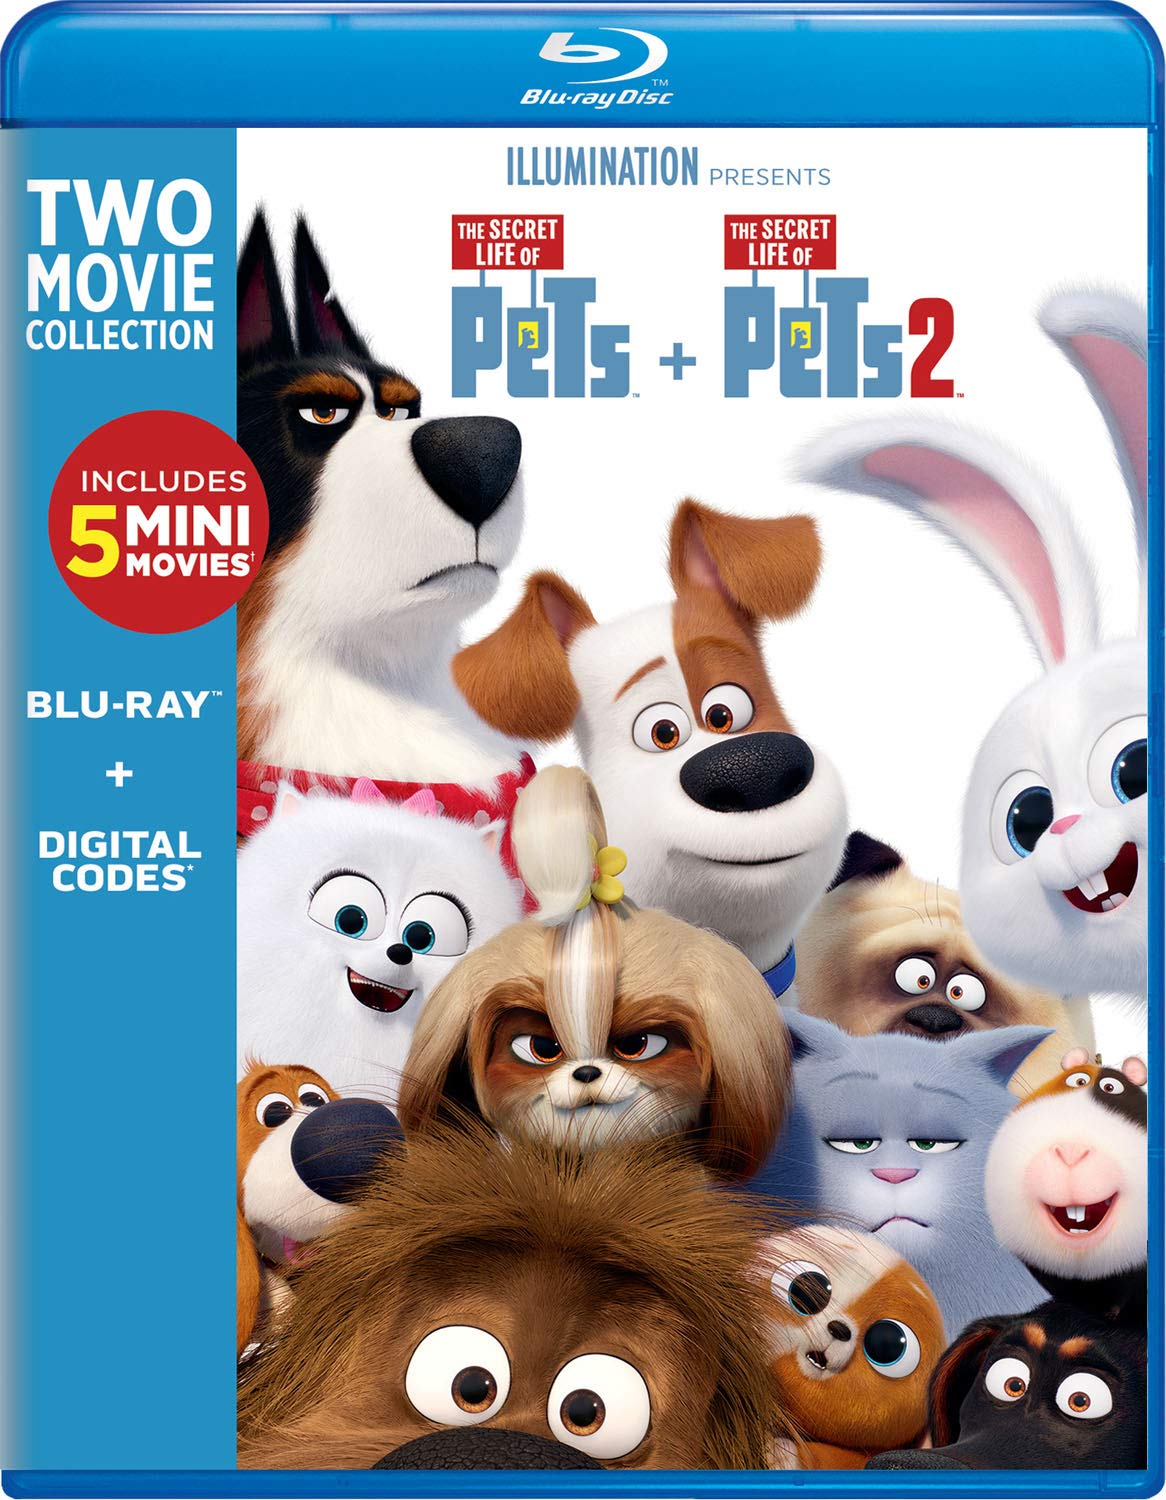 The Secret Life Of Pets 1 & 2 (Blu-ray Double Feature) - Blu-ray [ 2019 ]  - Animation Movies On Blu-ray - Movies On GRUV